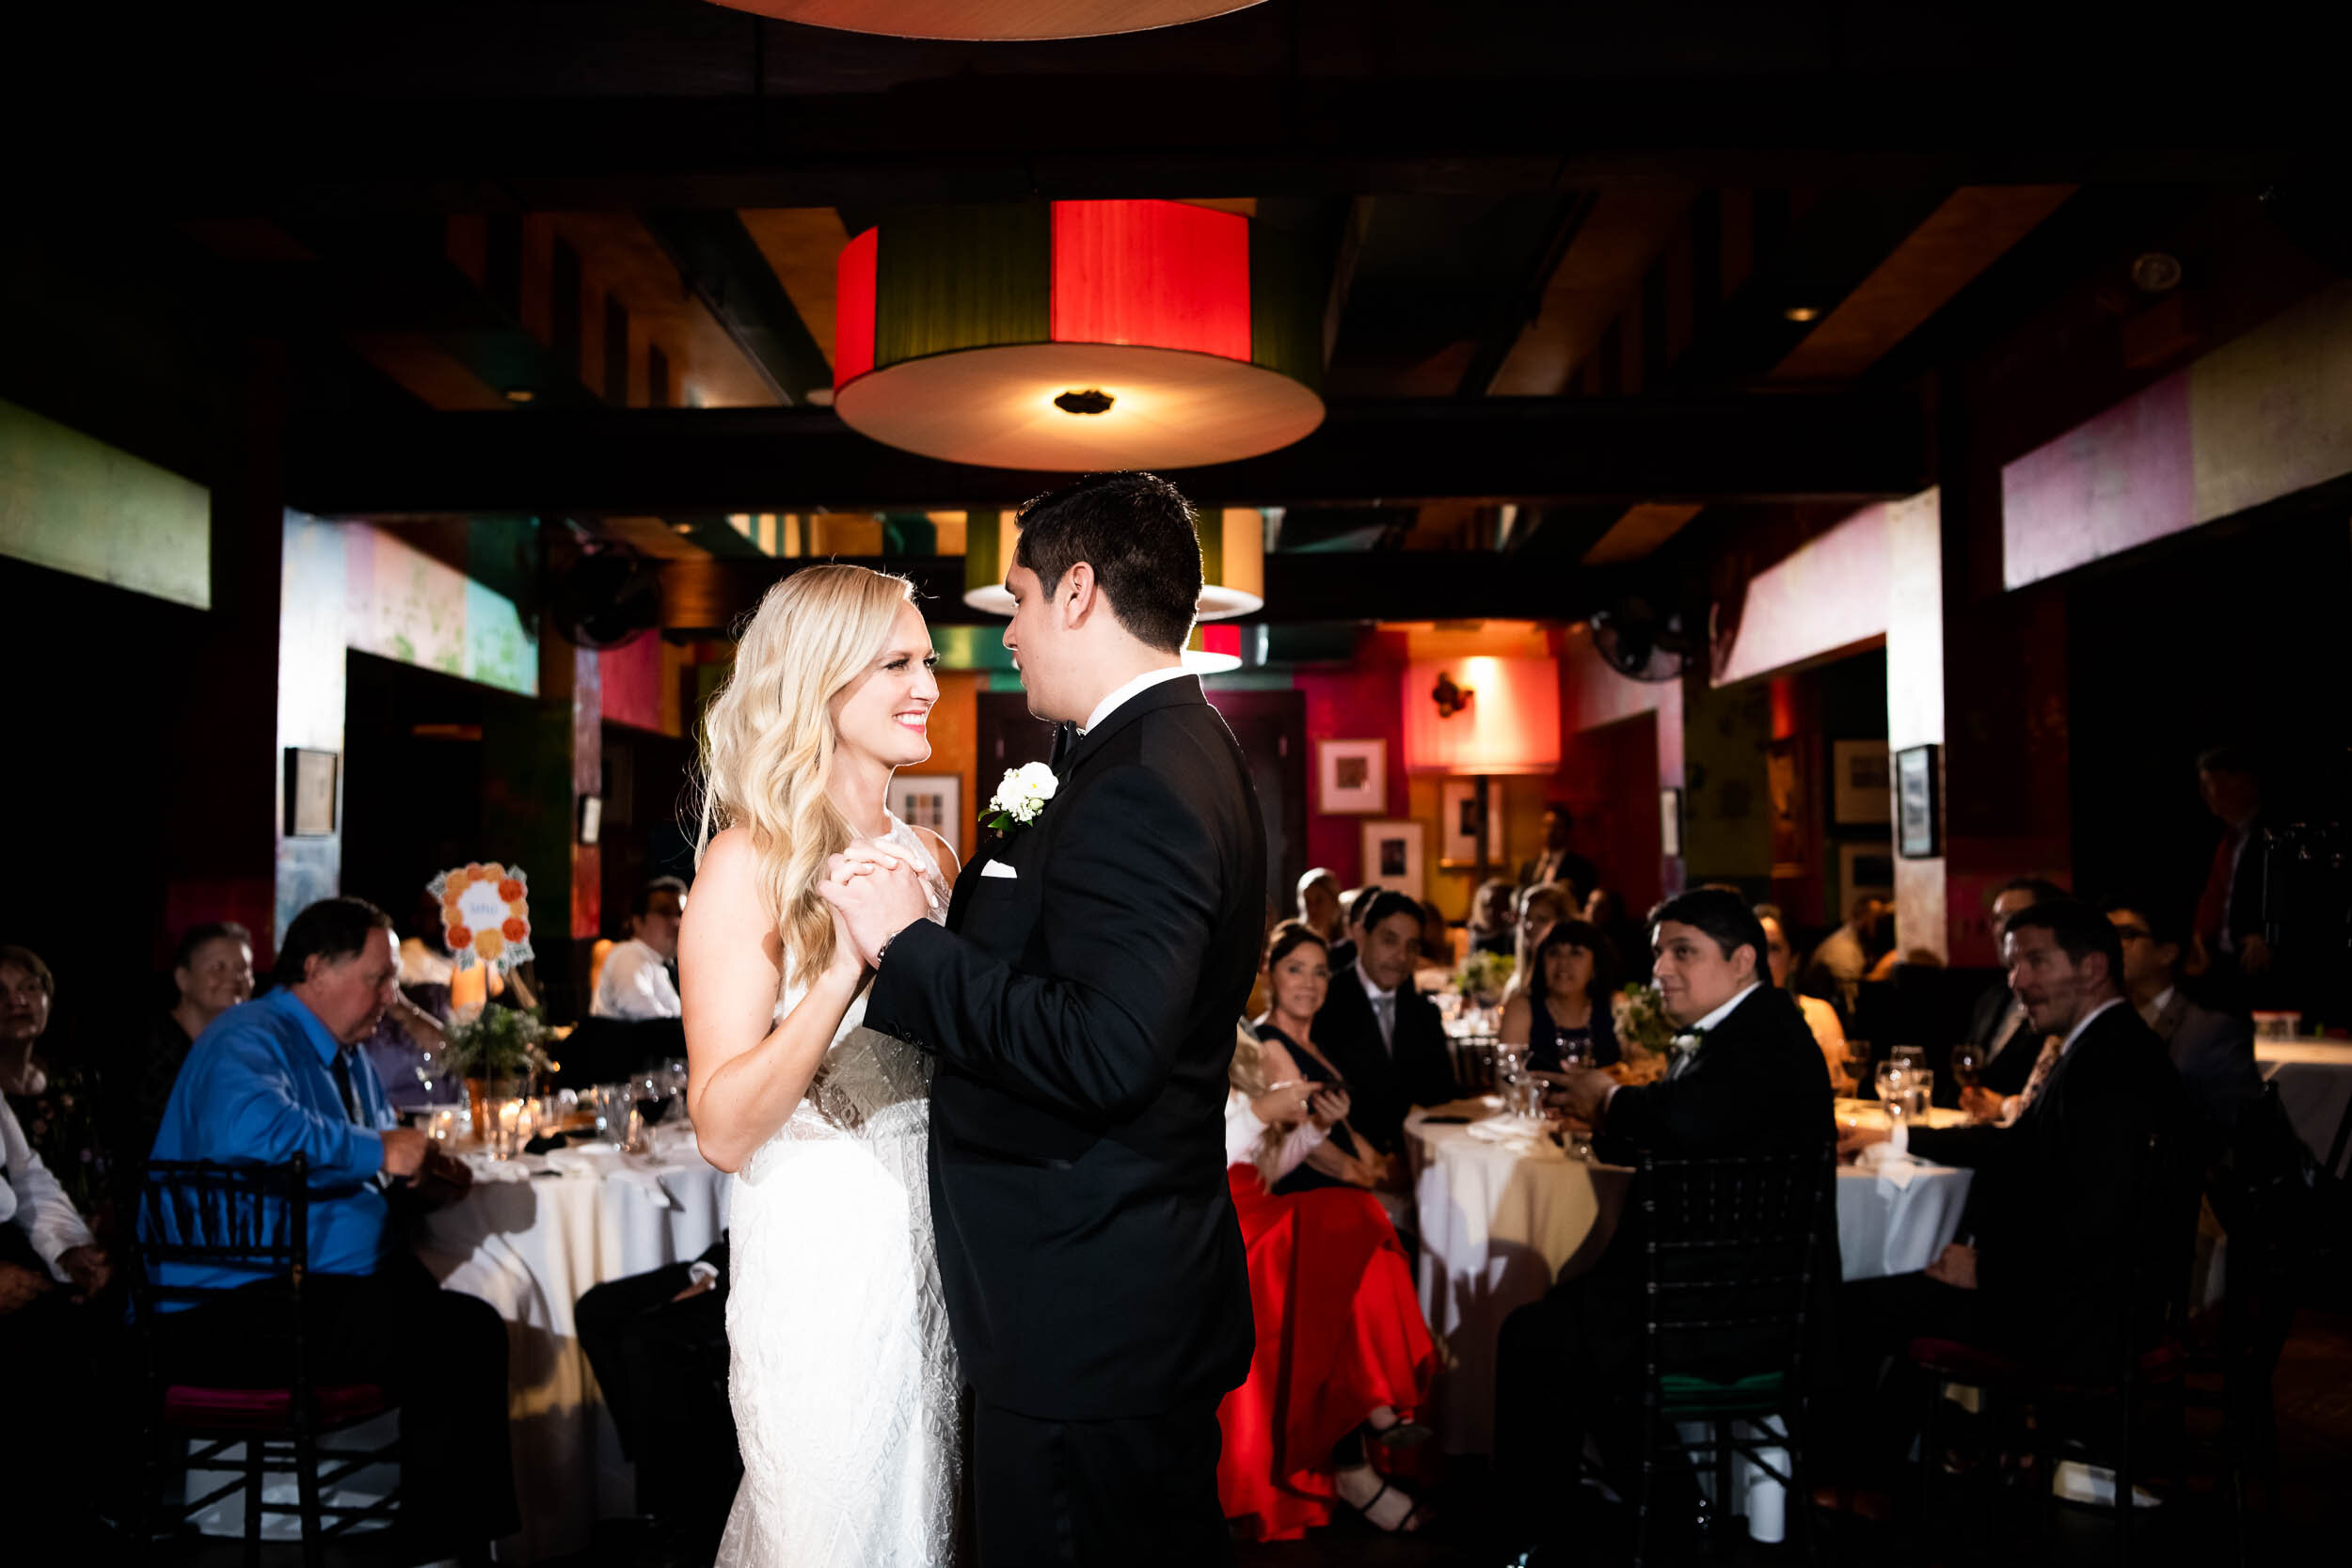 Wedding first dance: Carnivale Chicago Wedding captured by J. Brown Photography